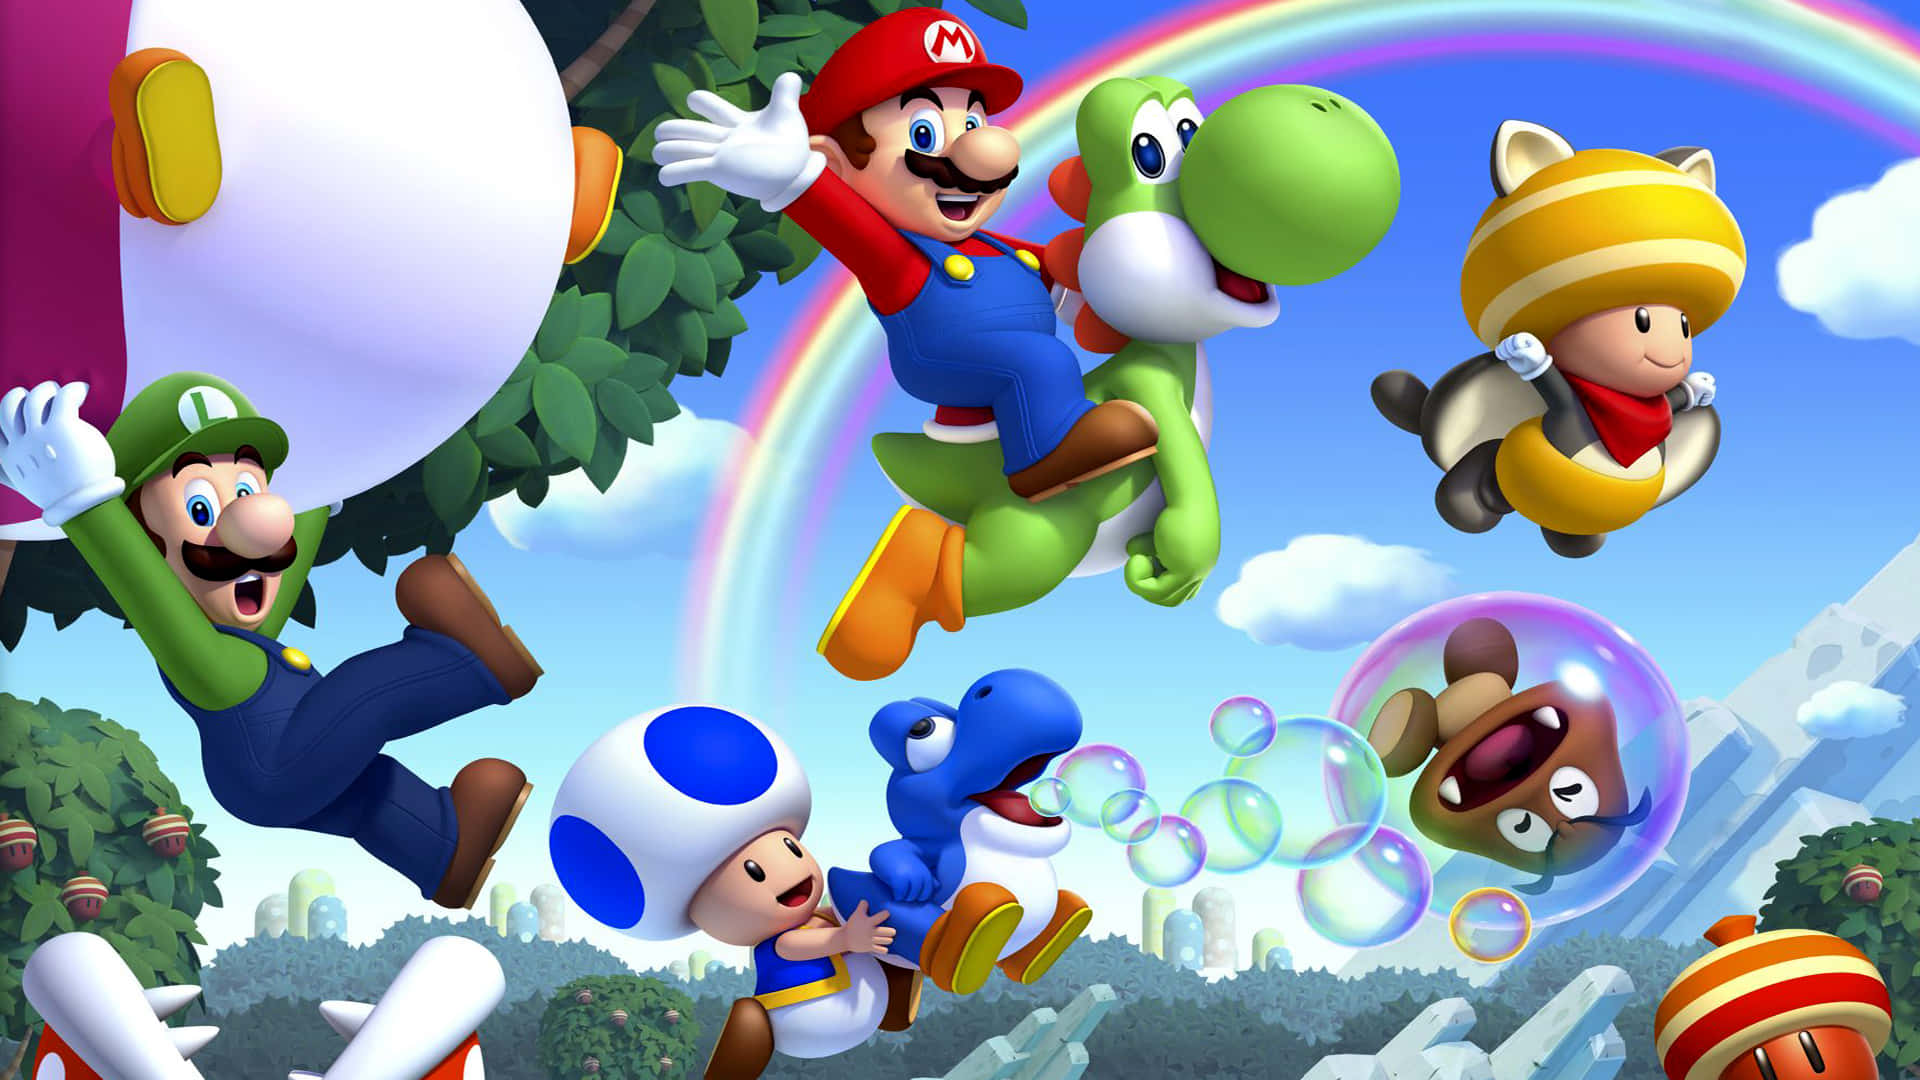 Group of Classic Super Mario Characters Wallpaper